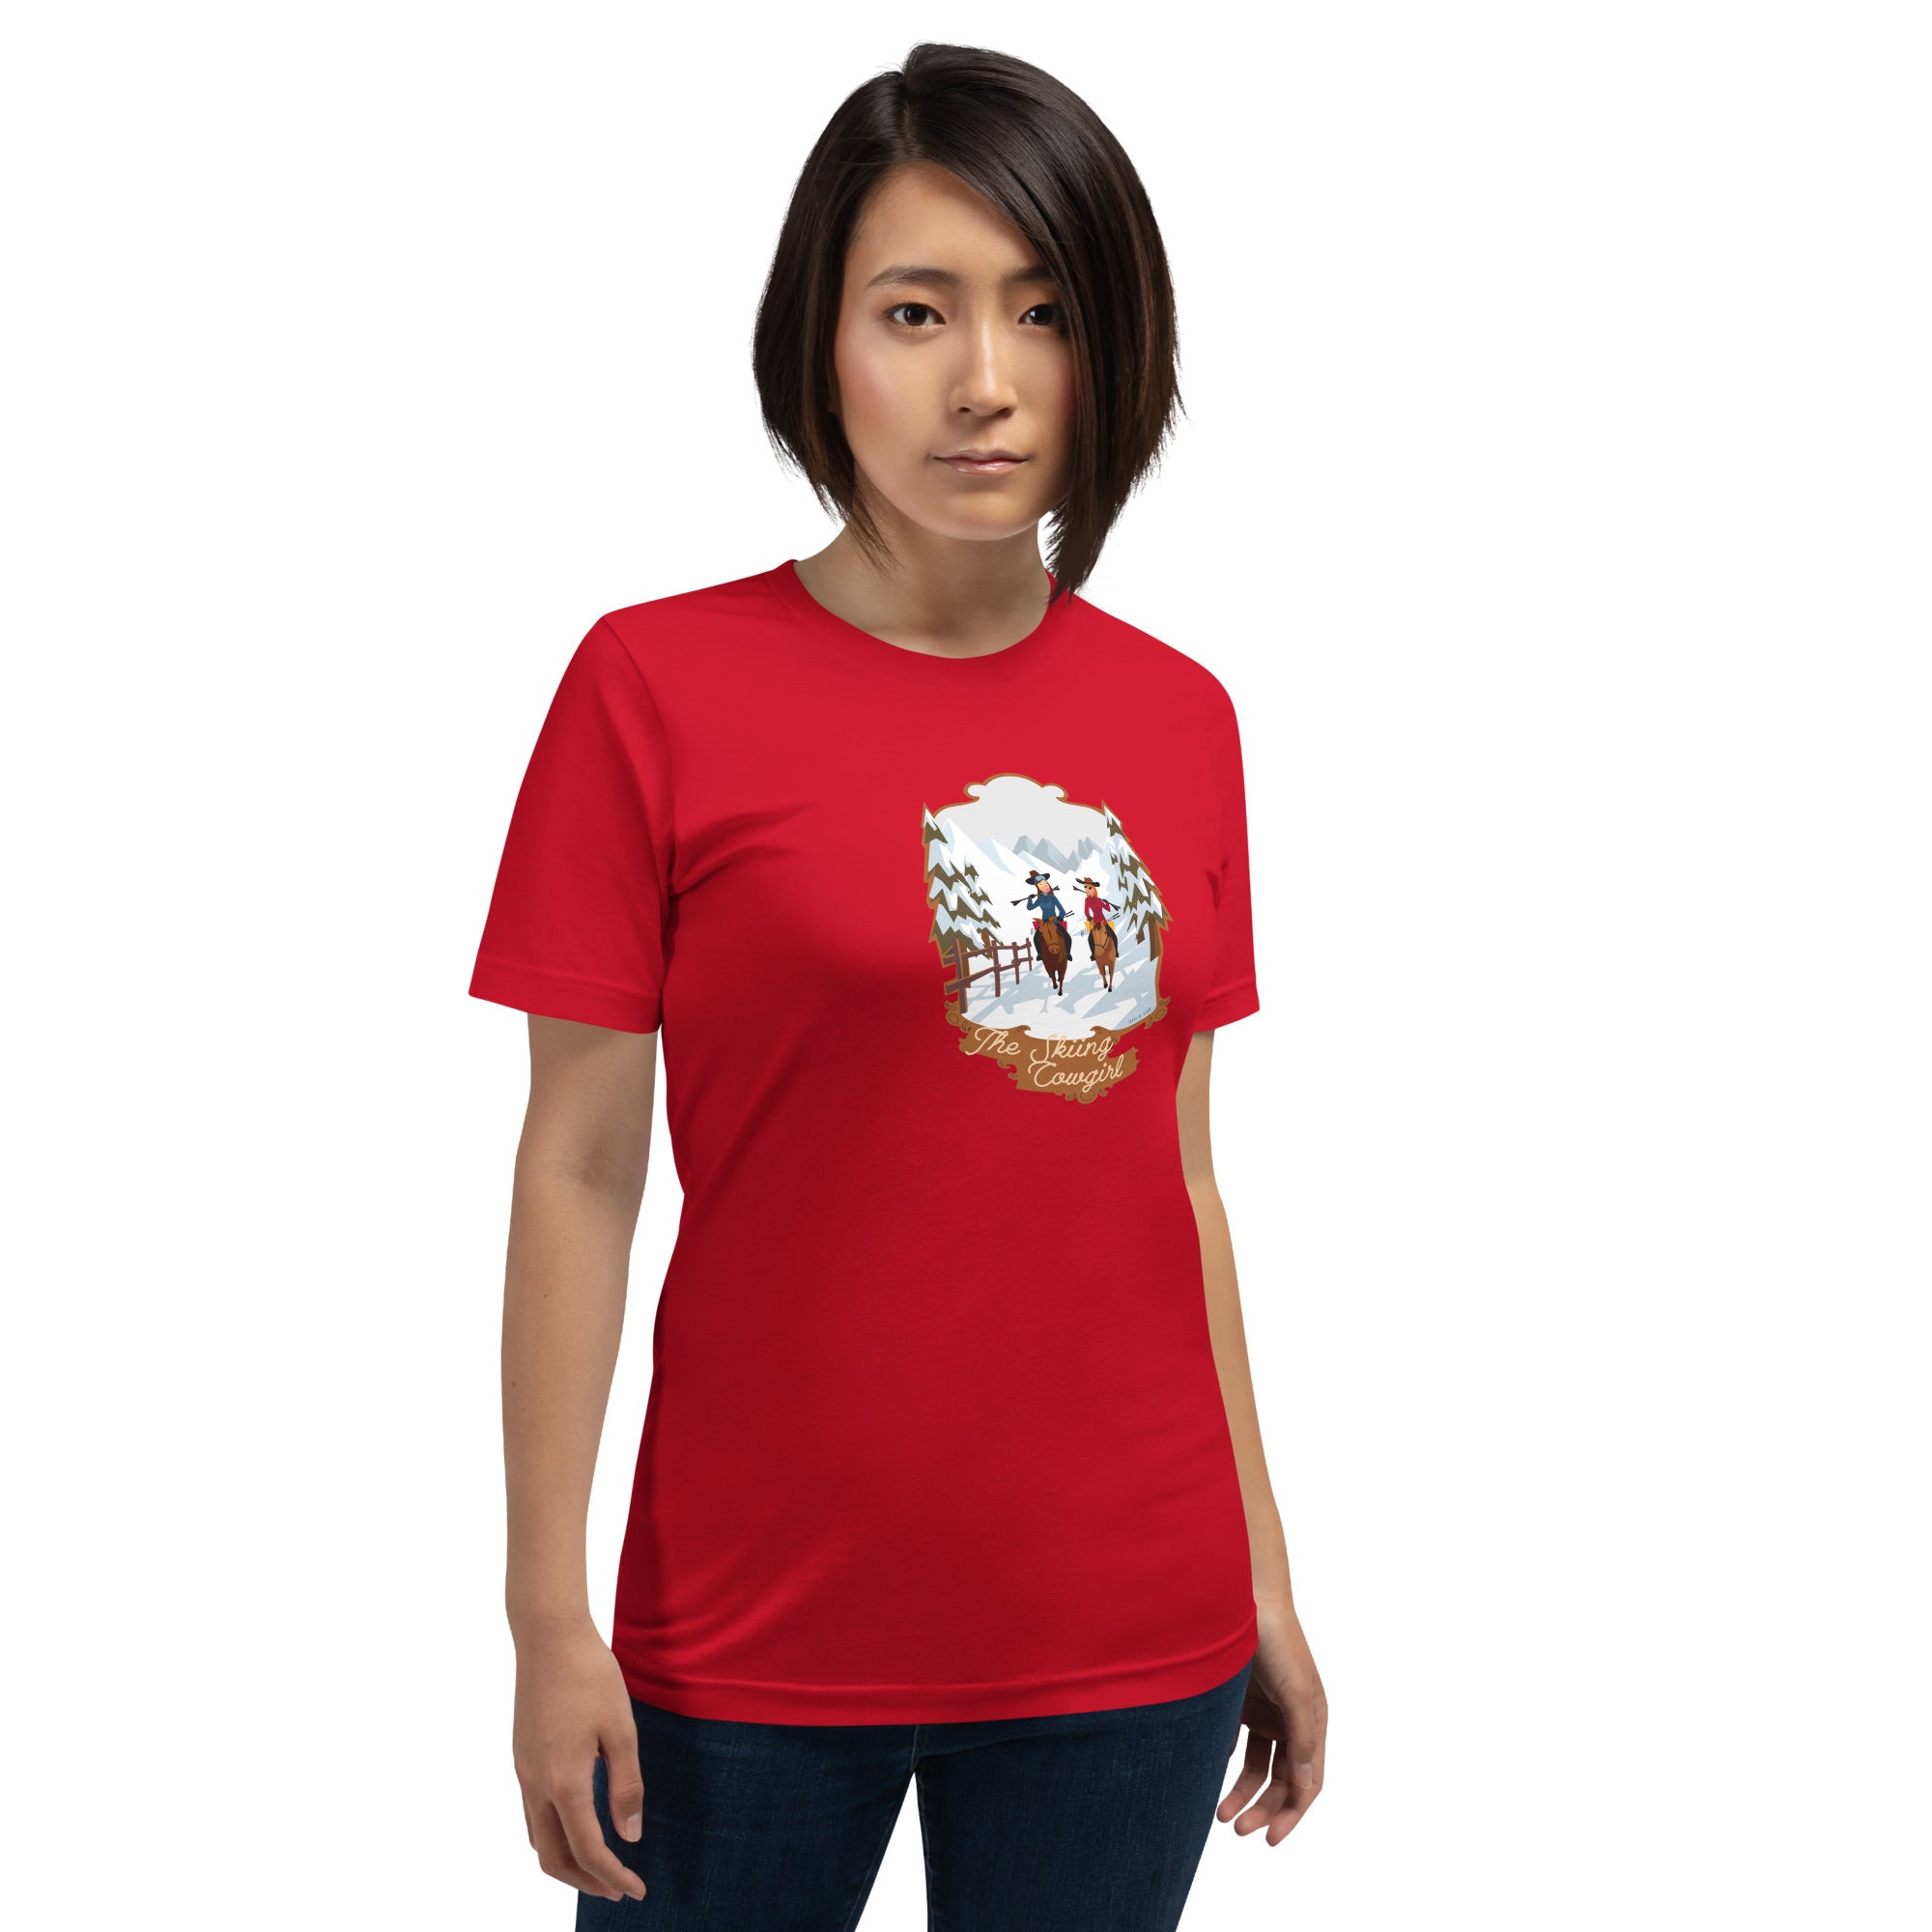 Unisex cotton t-shirt The Skiing Cowgirl on bright colors